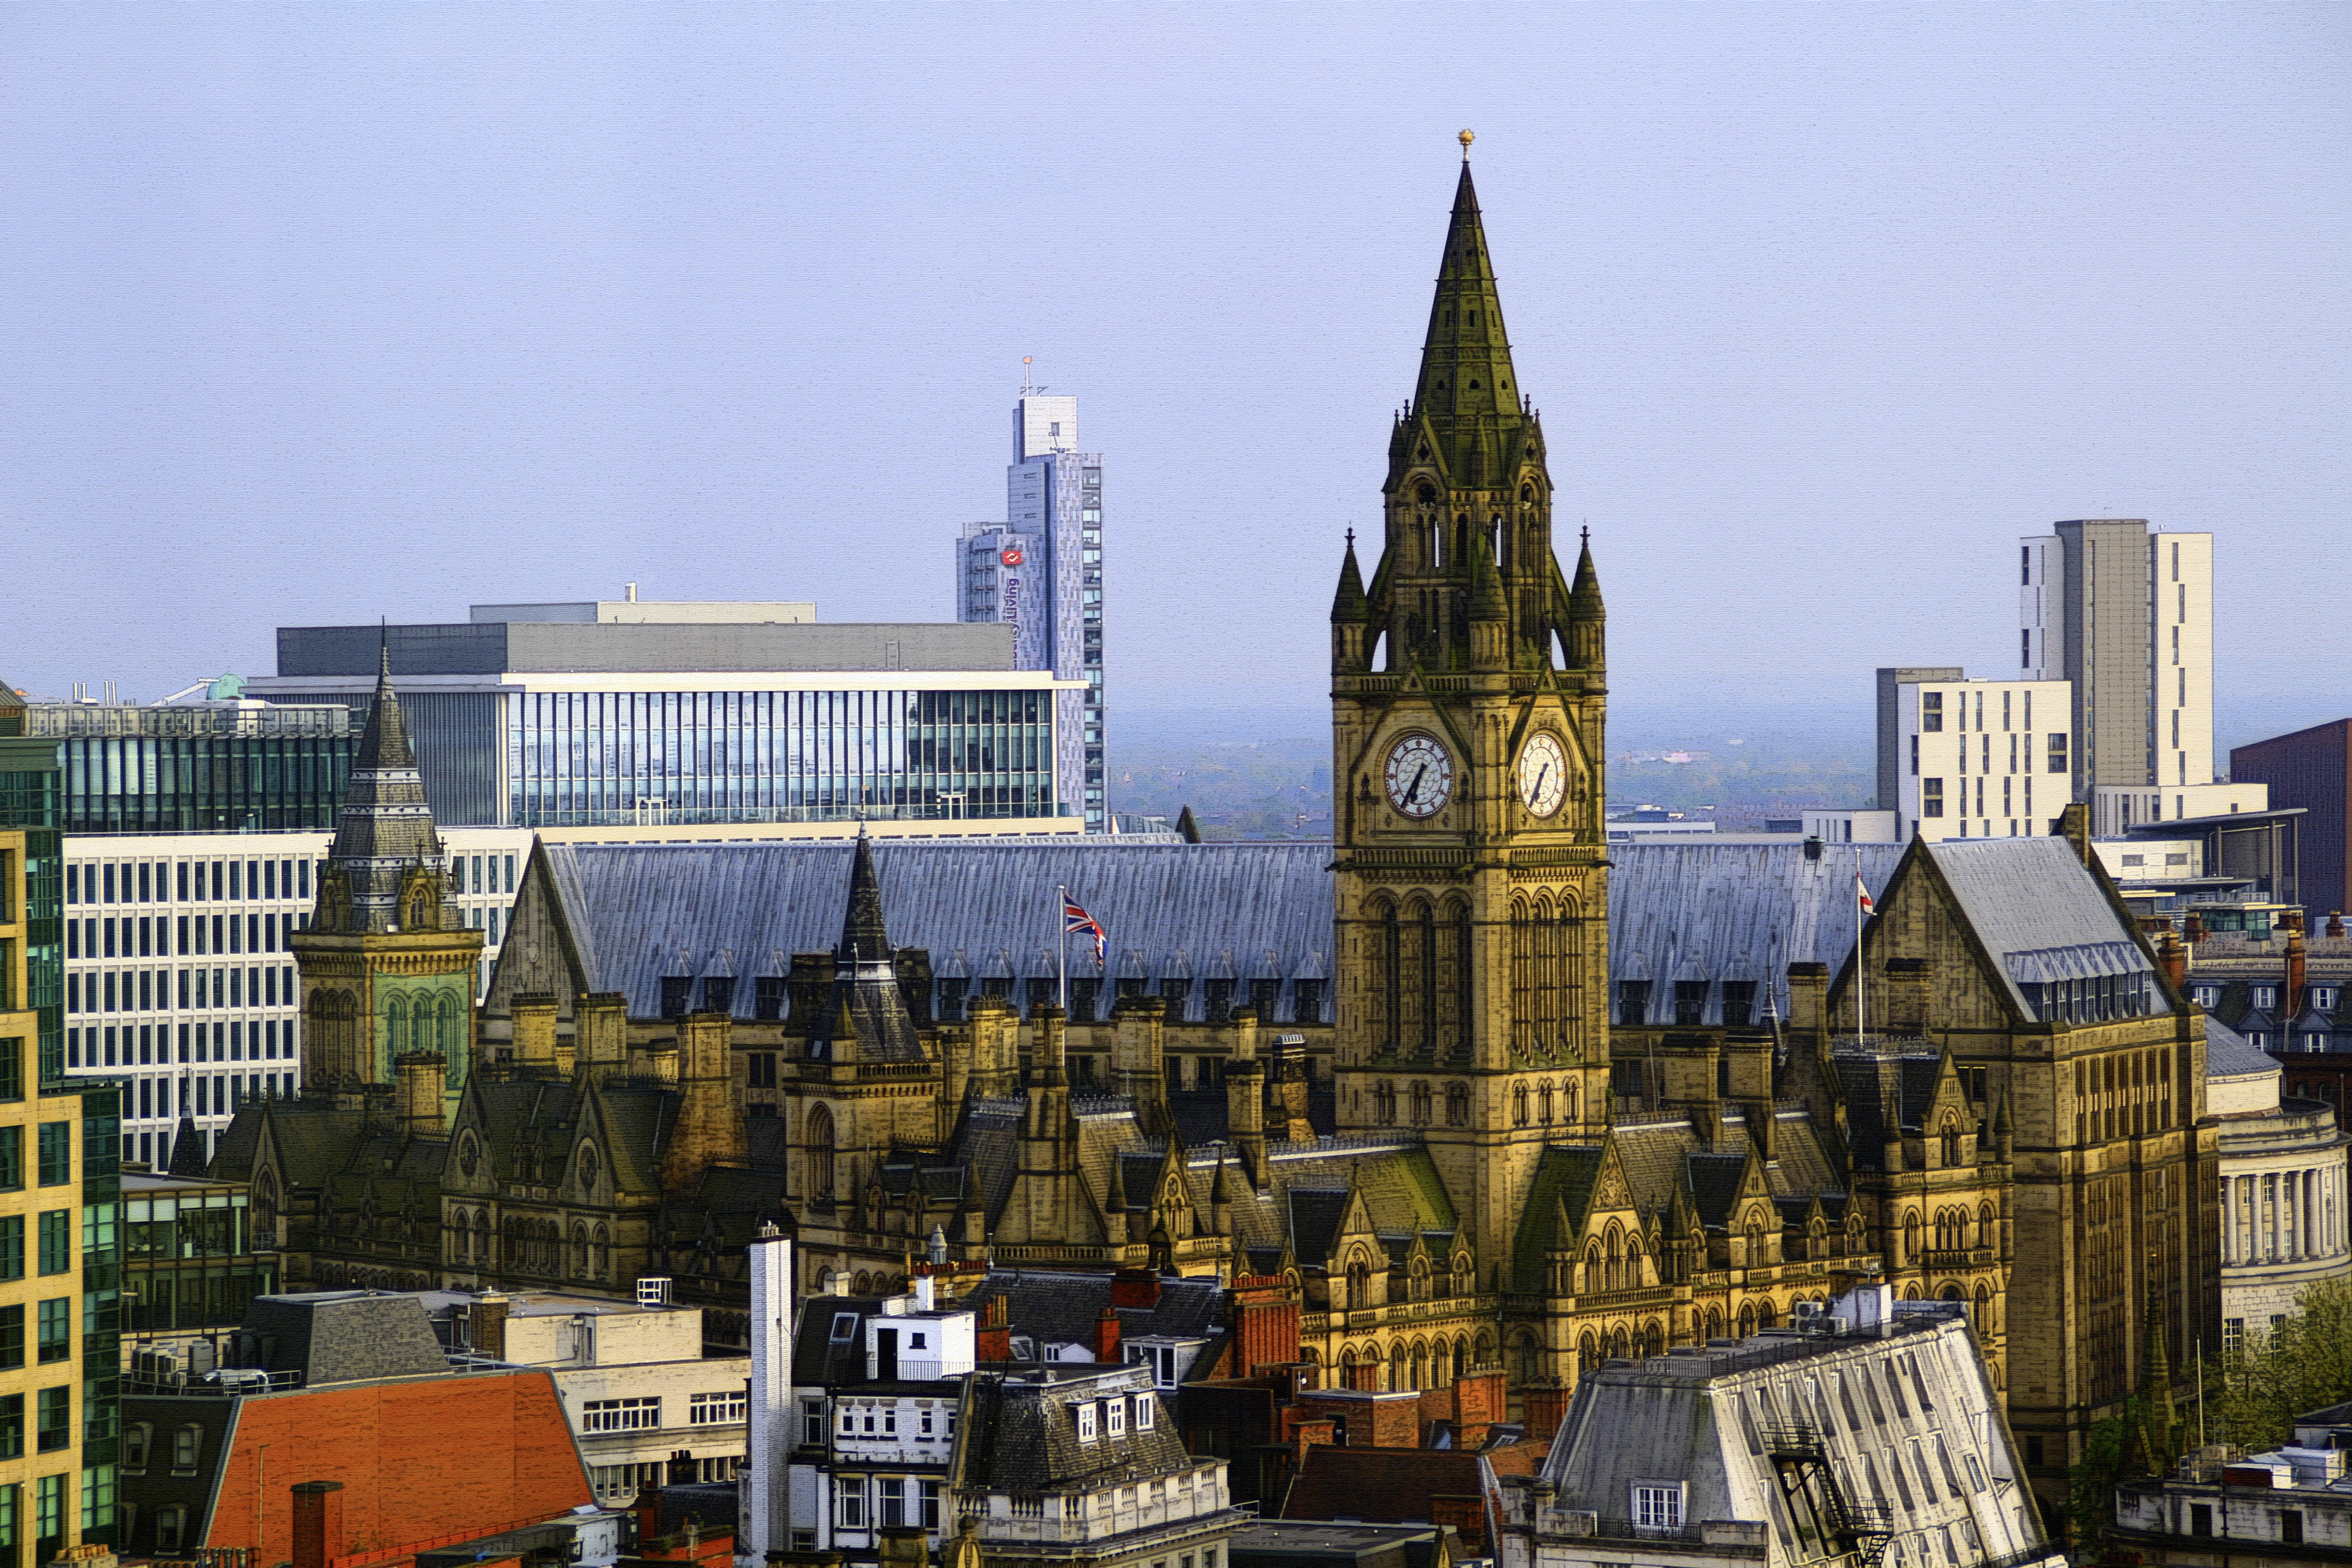 Take-up of Manchester office space has continued to boom this year.